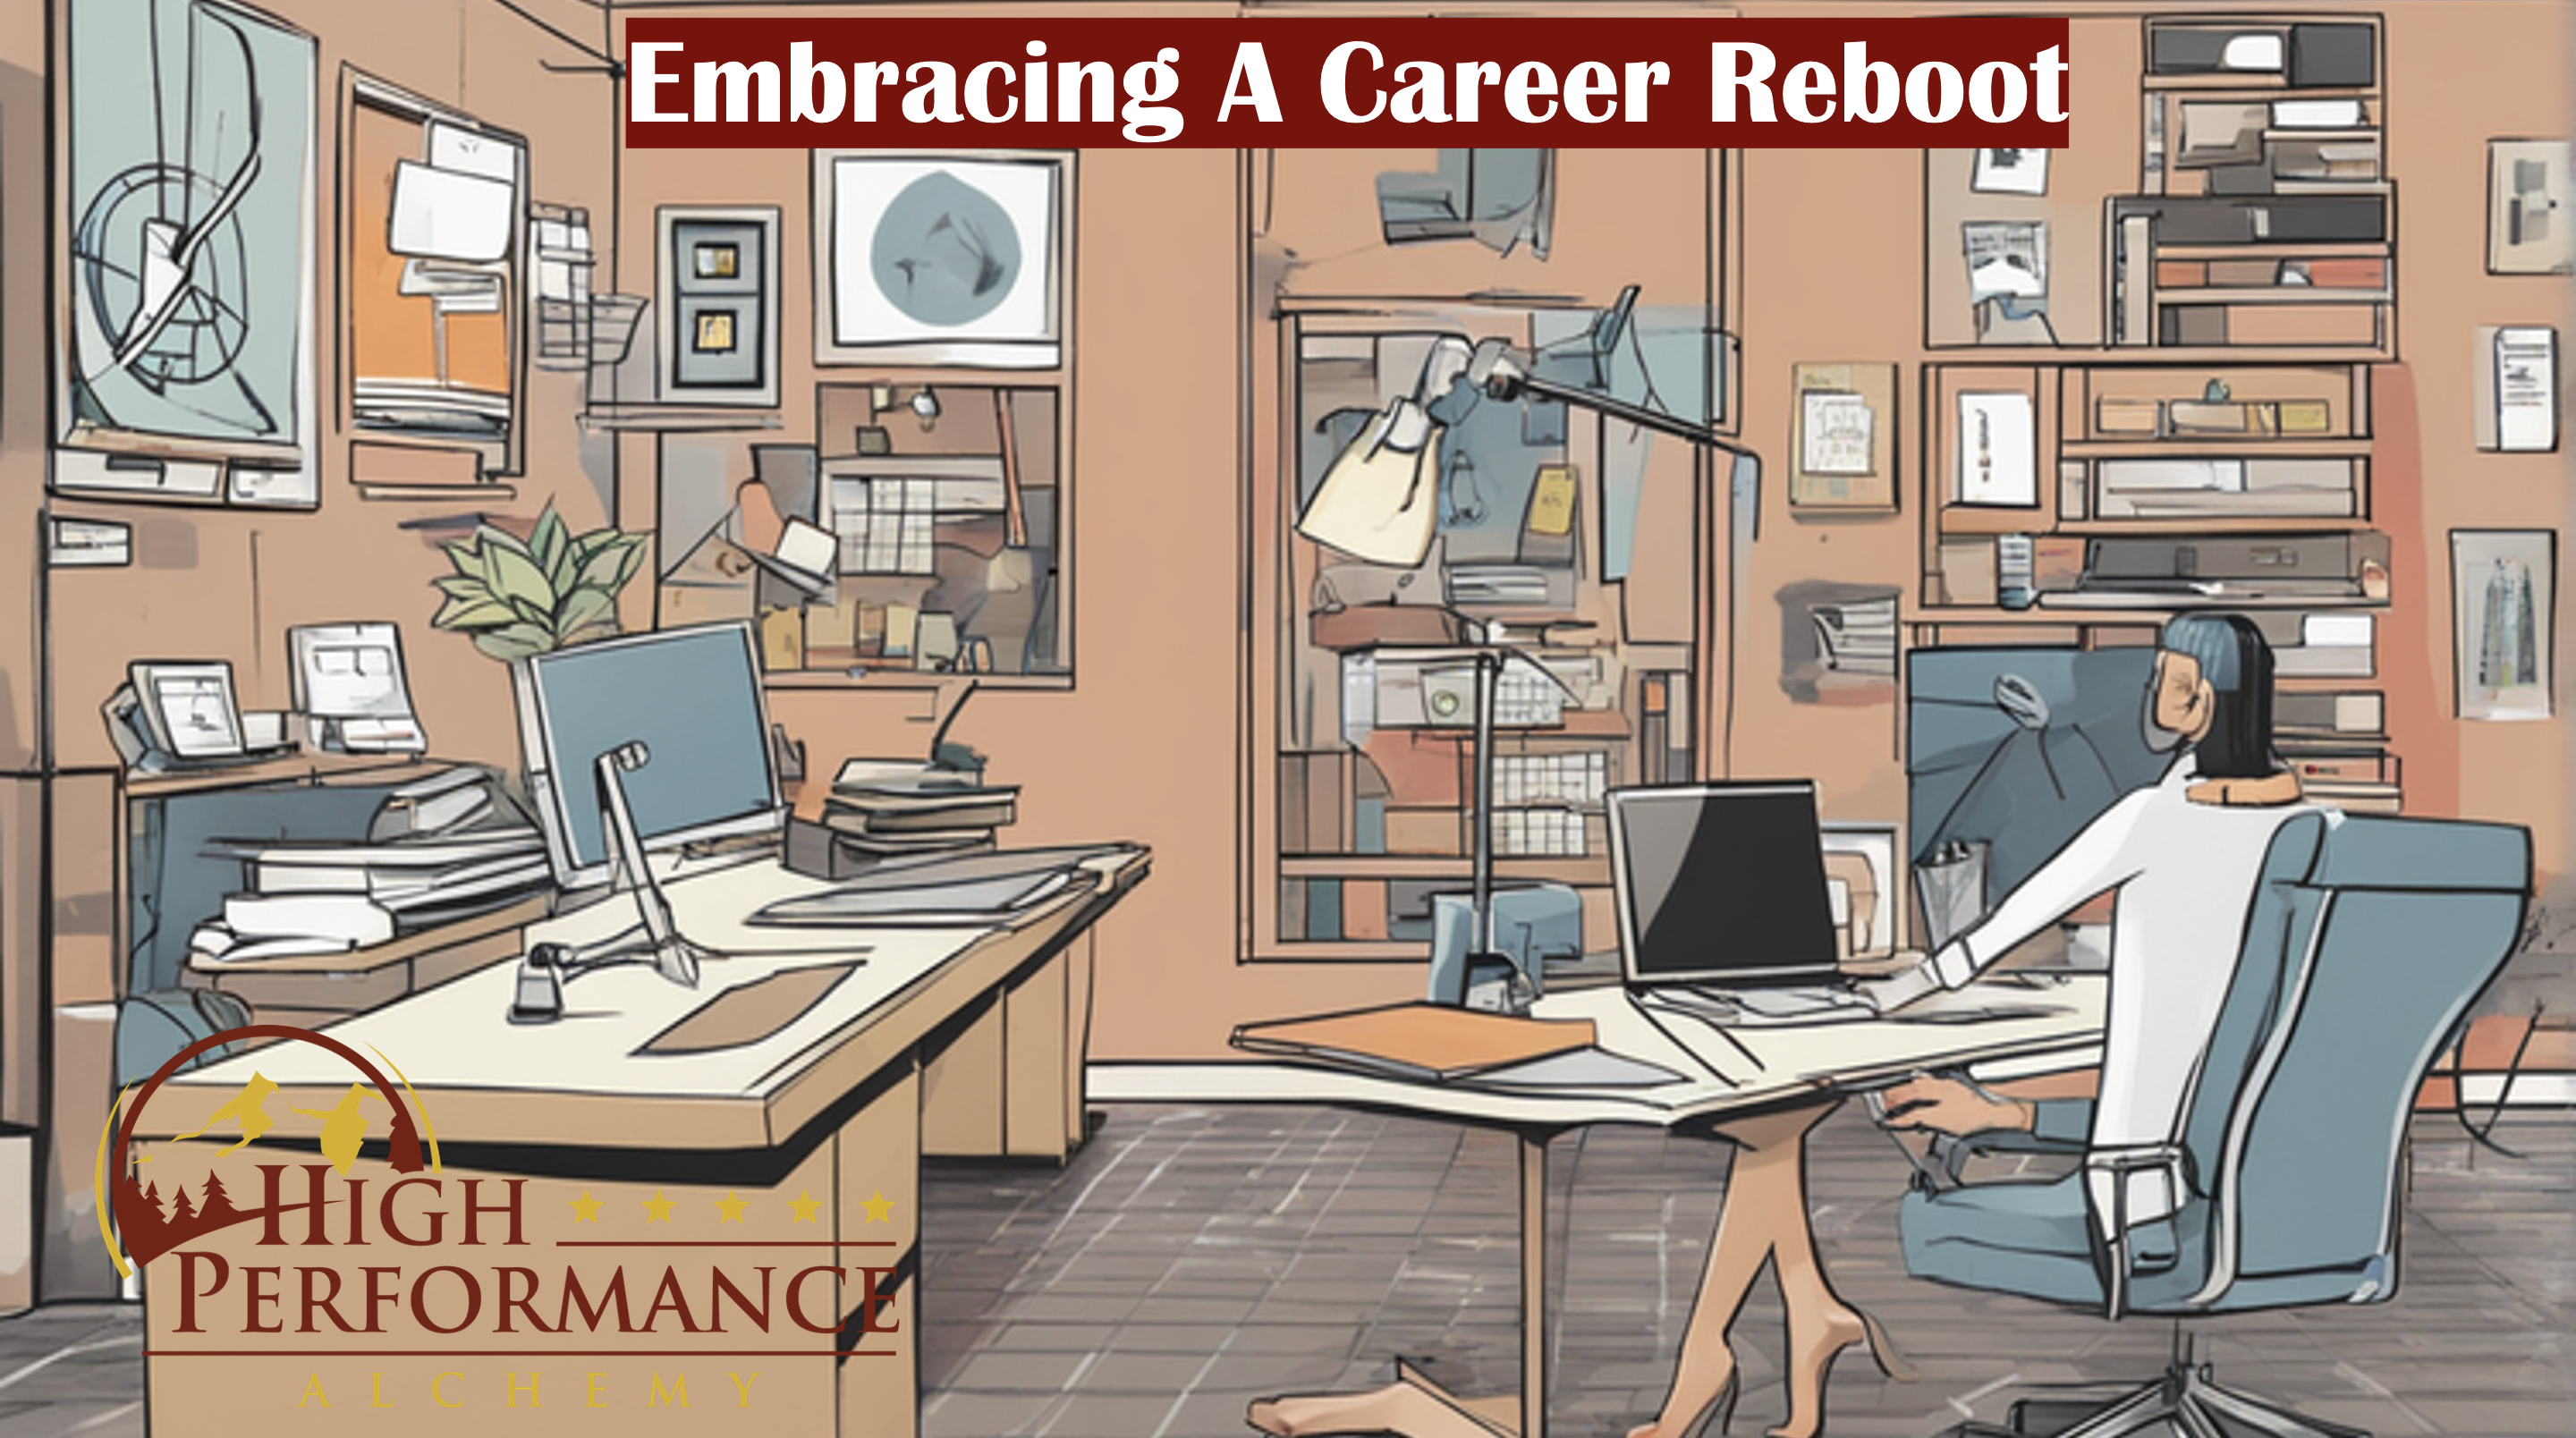 Embracing a Career Reboot: 5 Compelling Reasons for Amplifying Current Career Growth or Changing Career Paths